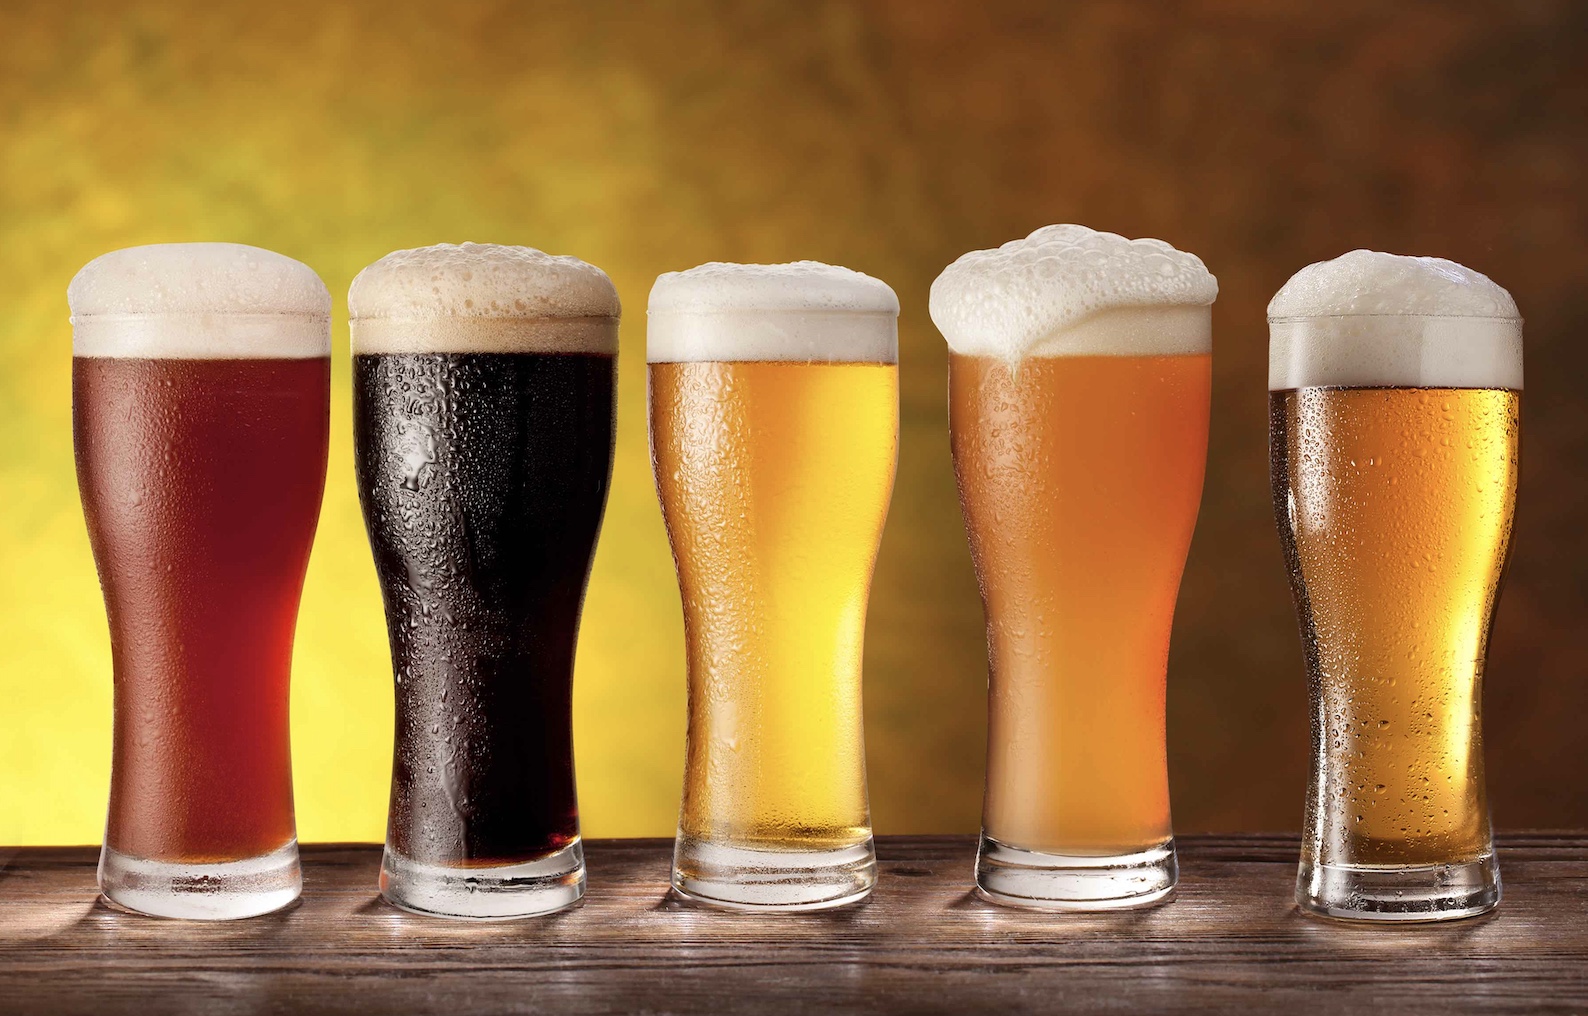 THE RICHNESS OF FLAVOURS AND THE HISTORY OF THE BEER ATTRACT MOST CONSUMERS